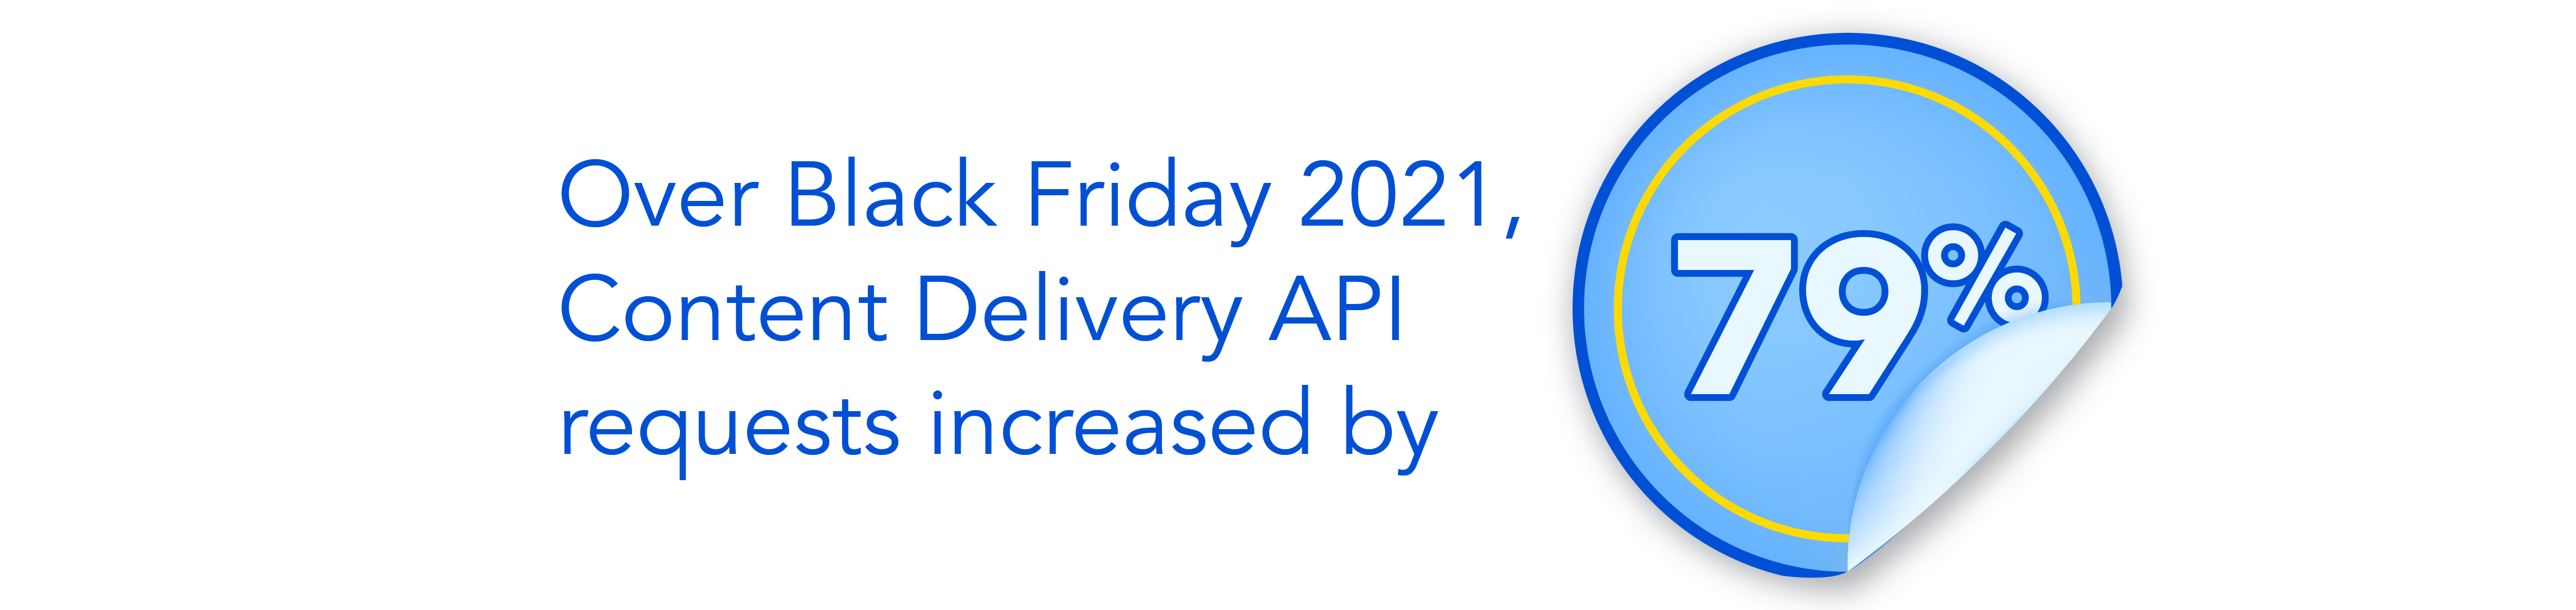 Over Black Friday 2021, Content Delivery API requests increased by 79%